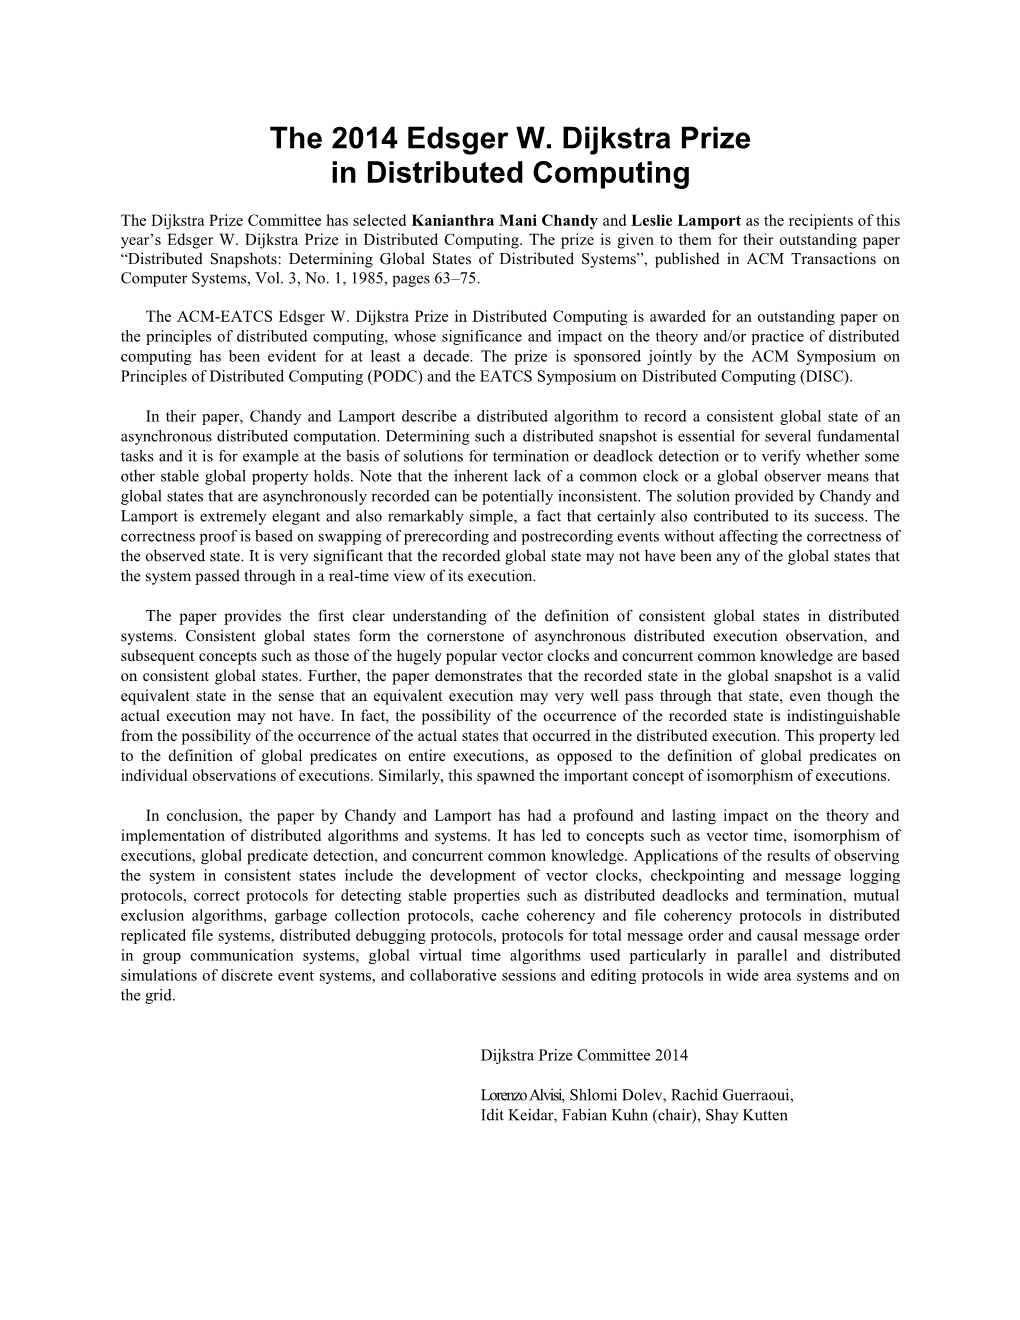 The 2014 Edsger W. Dijkstra Prize in Distributed Computing